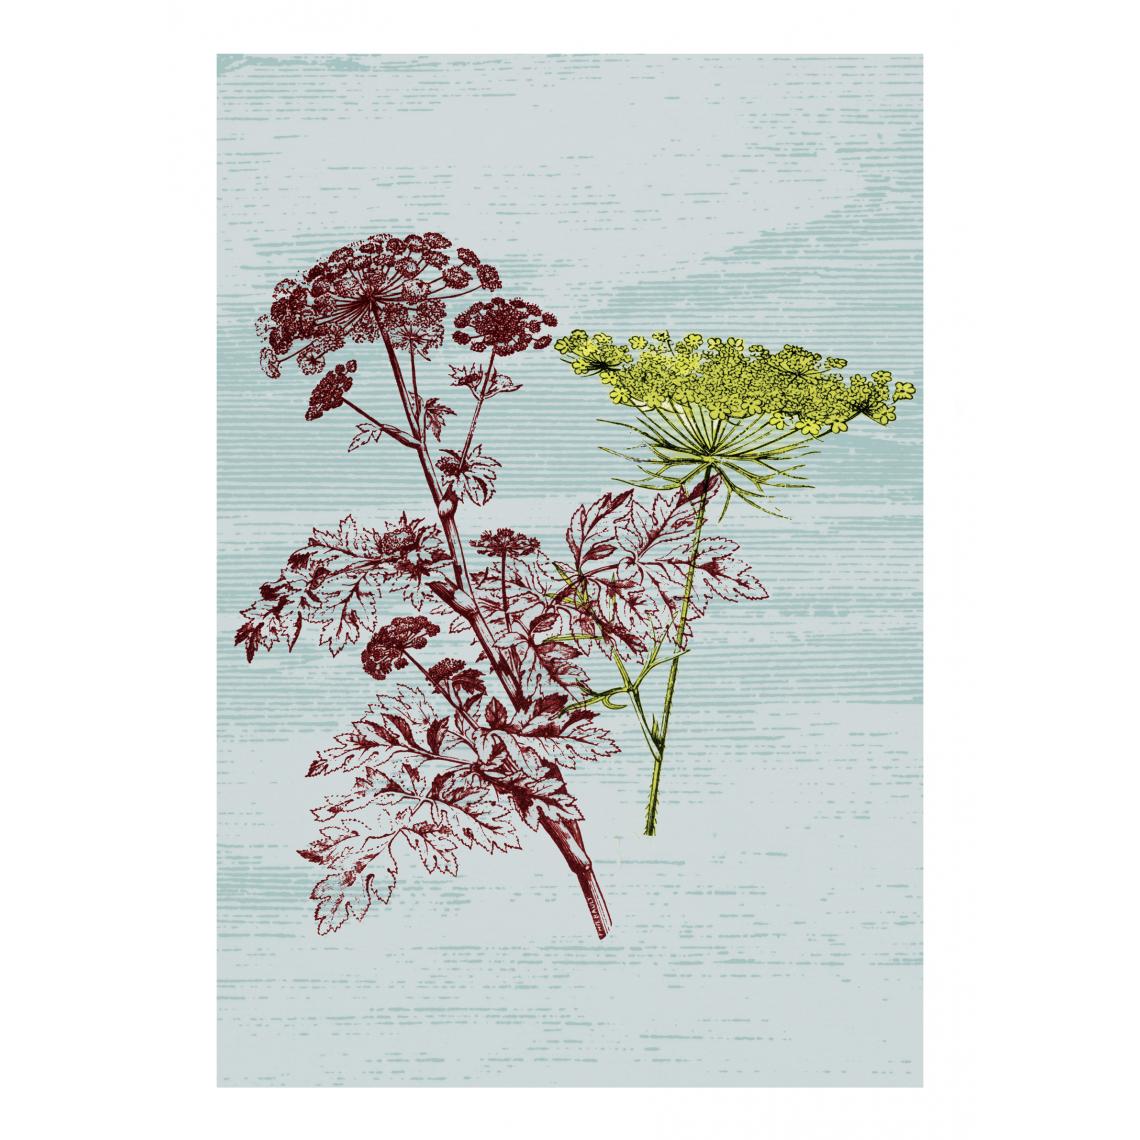 Beneffito - BOTANICAL - Signature Poster - Parsley - 21x30 cm - Affiches, posters